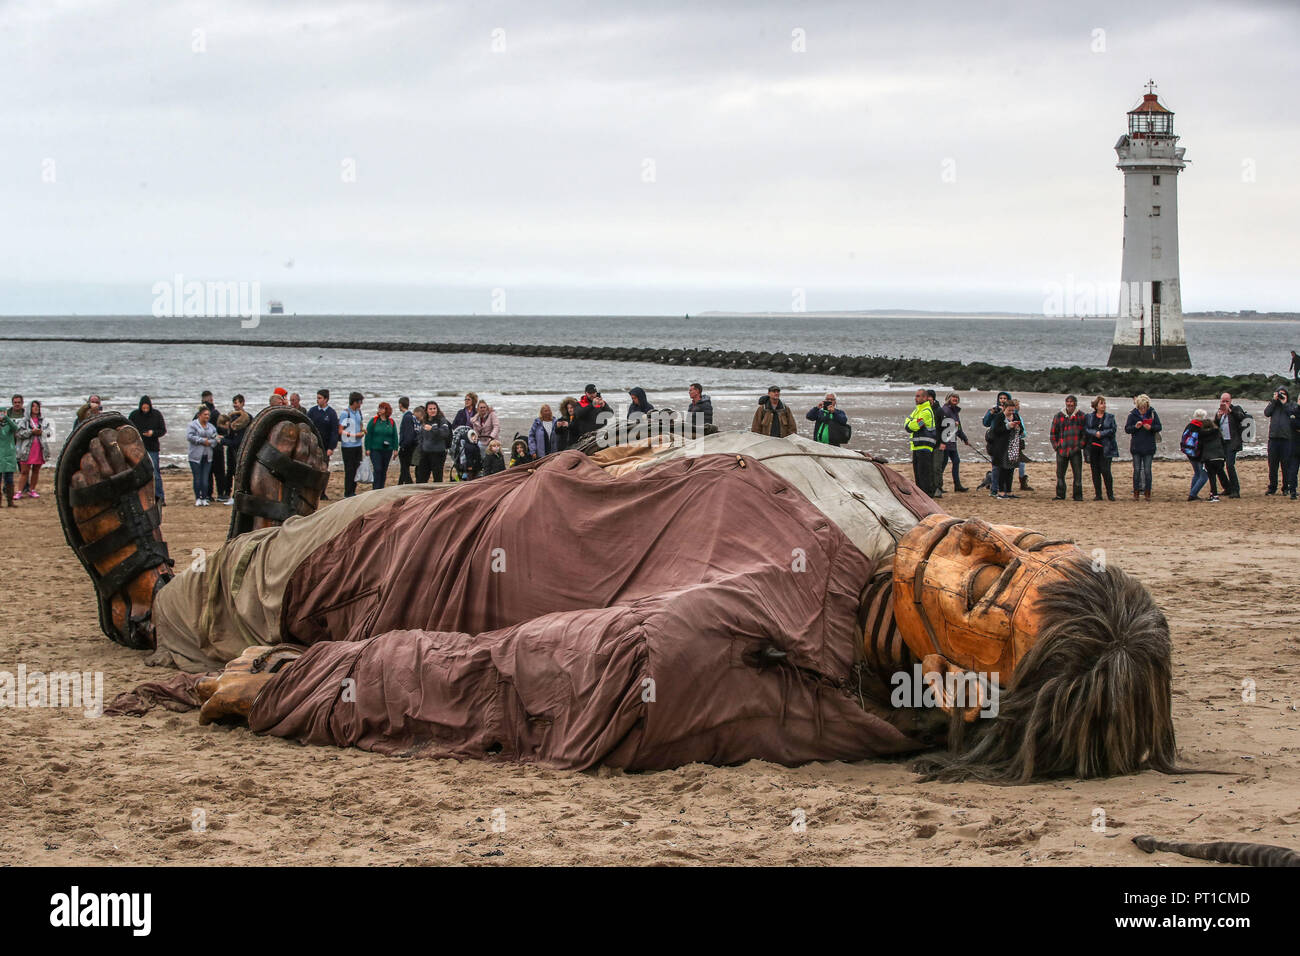 The Giant Man lays on the beach at New Brighton, Wirral, 'shipwrecked before he is woken up and goes for a walk', as part of the Royal De Luxe Giant Spectacular over the weekend. Stock Photo